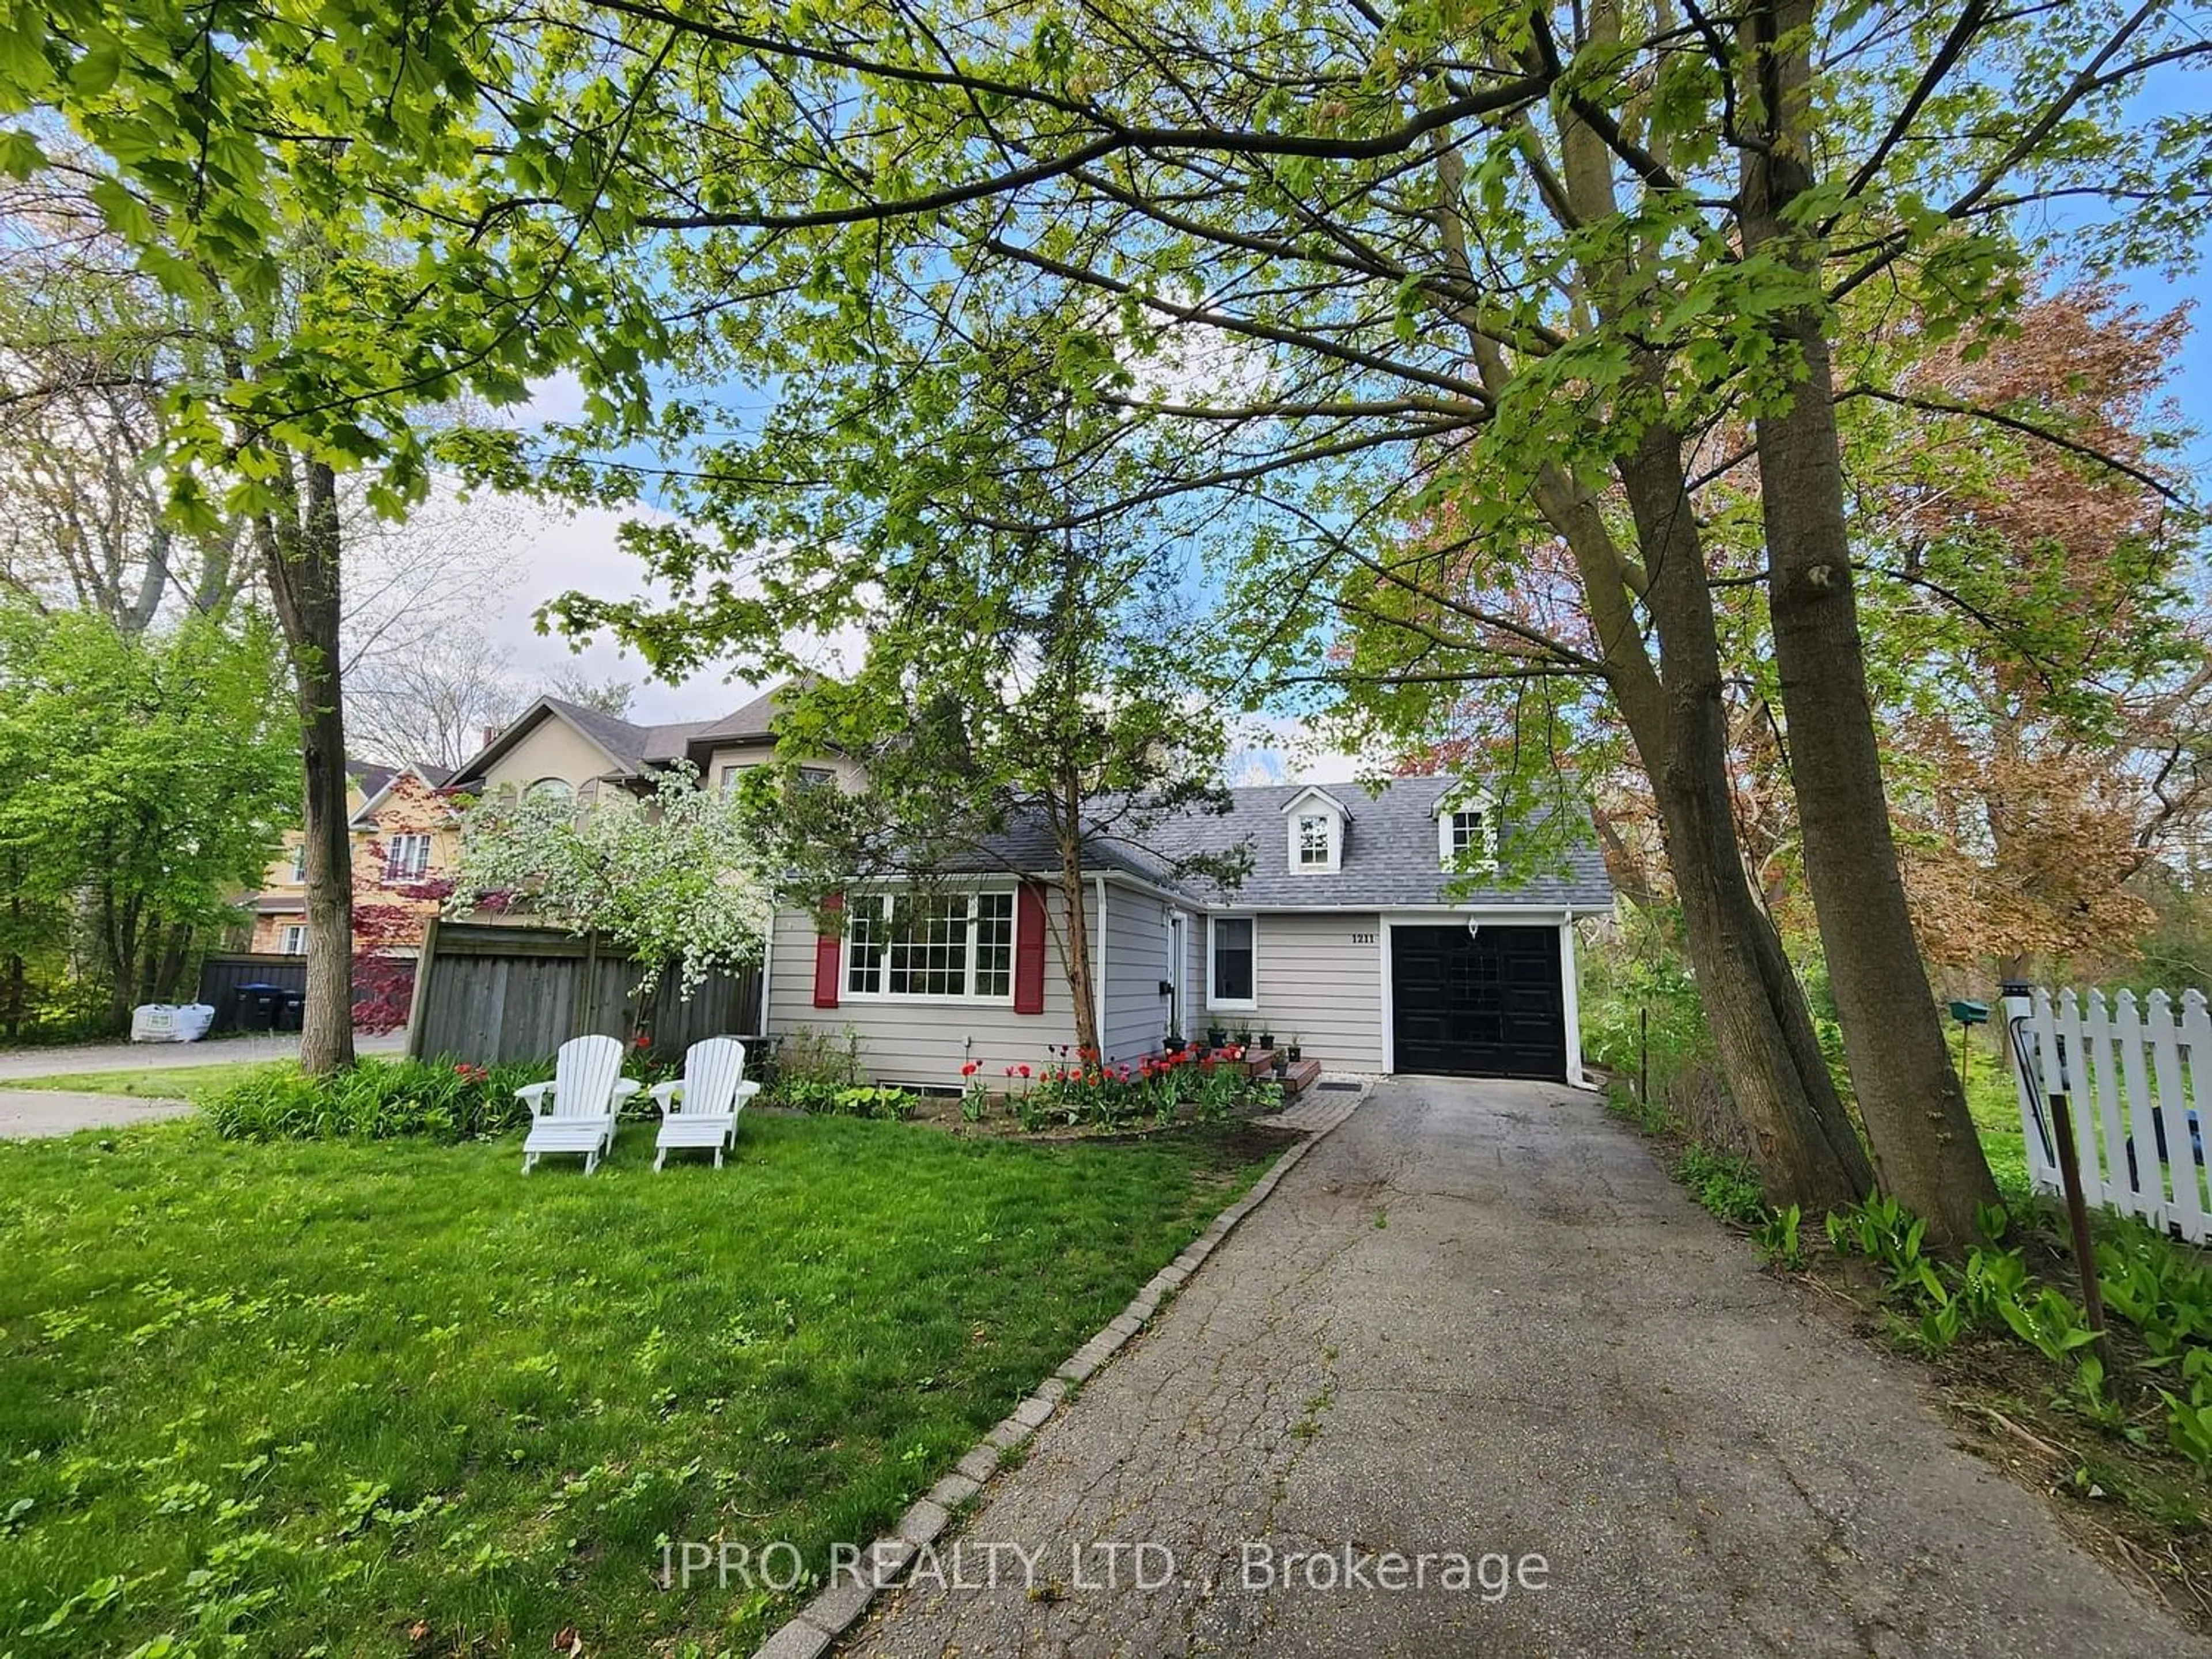 Frontside or backside of a home for 1211 Lorne Park Rd, Mississauga Ontario L5H 3A7